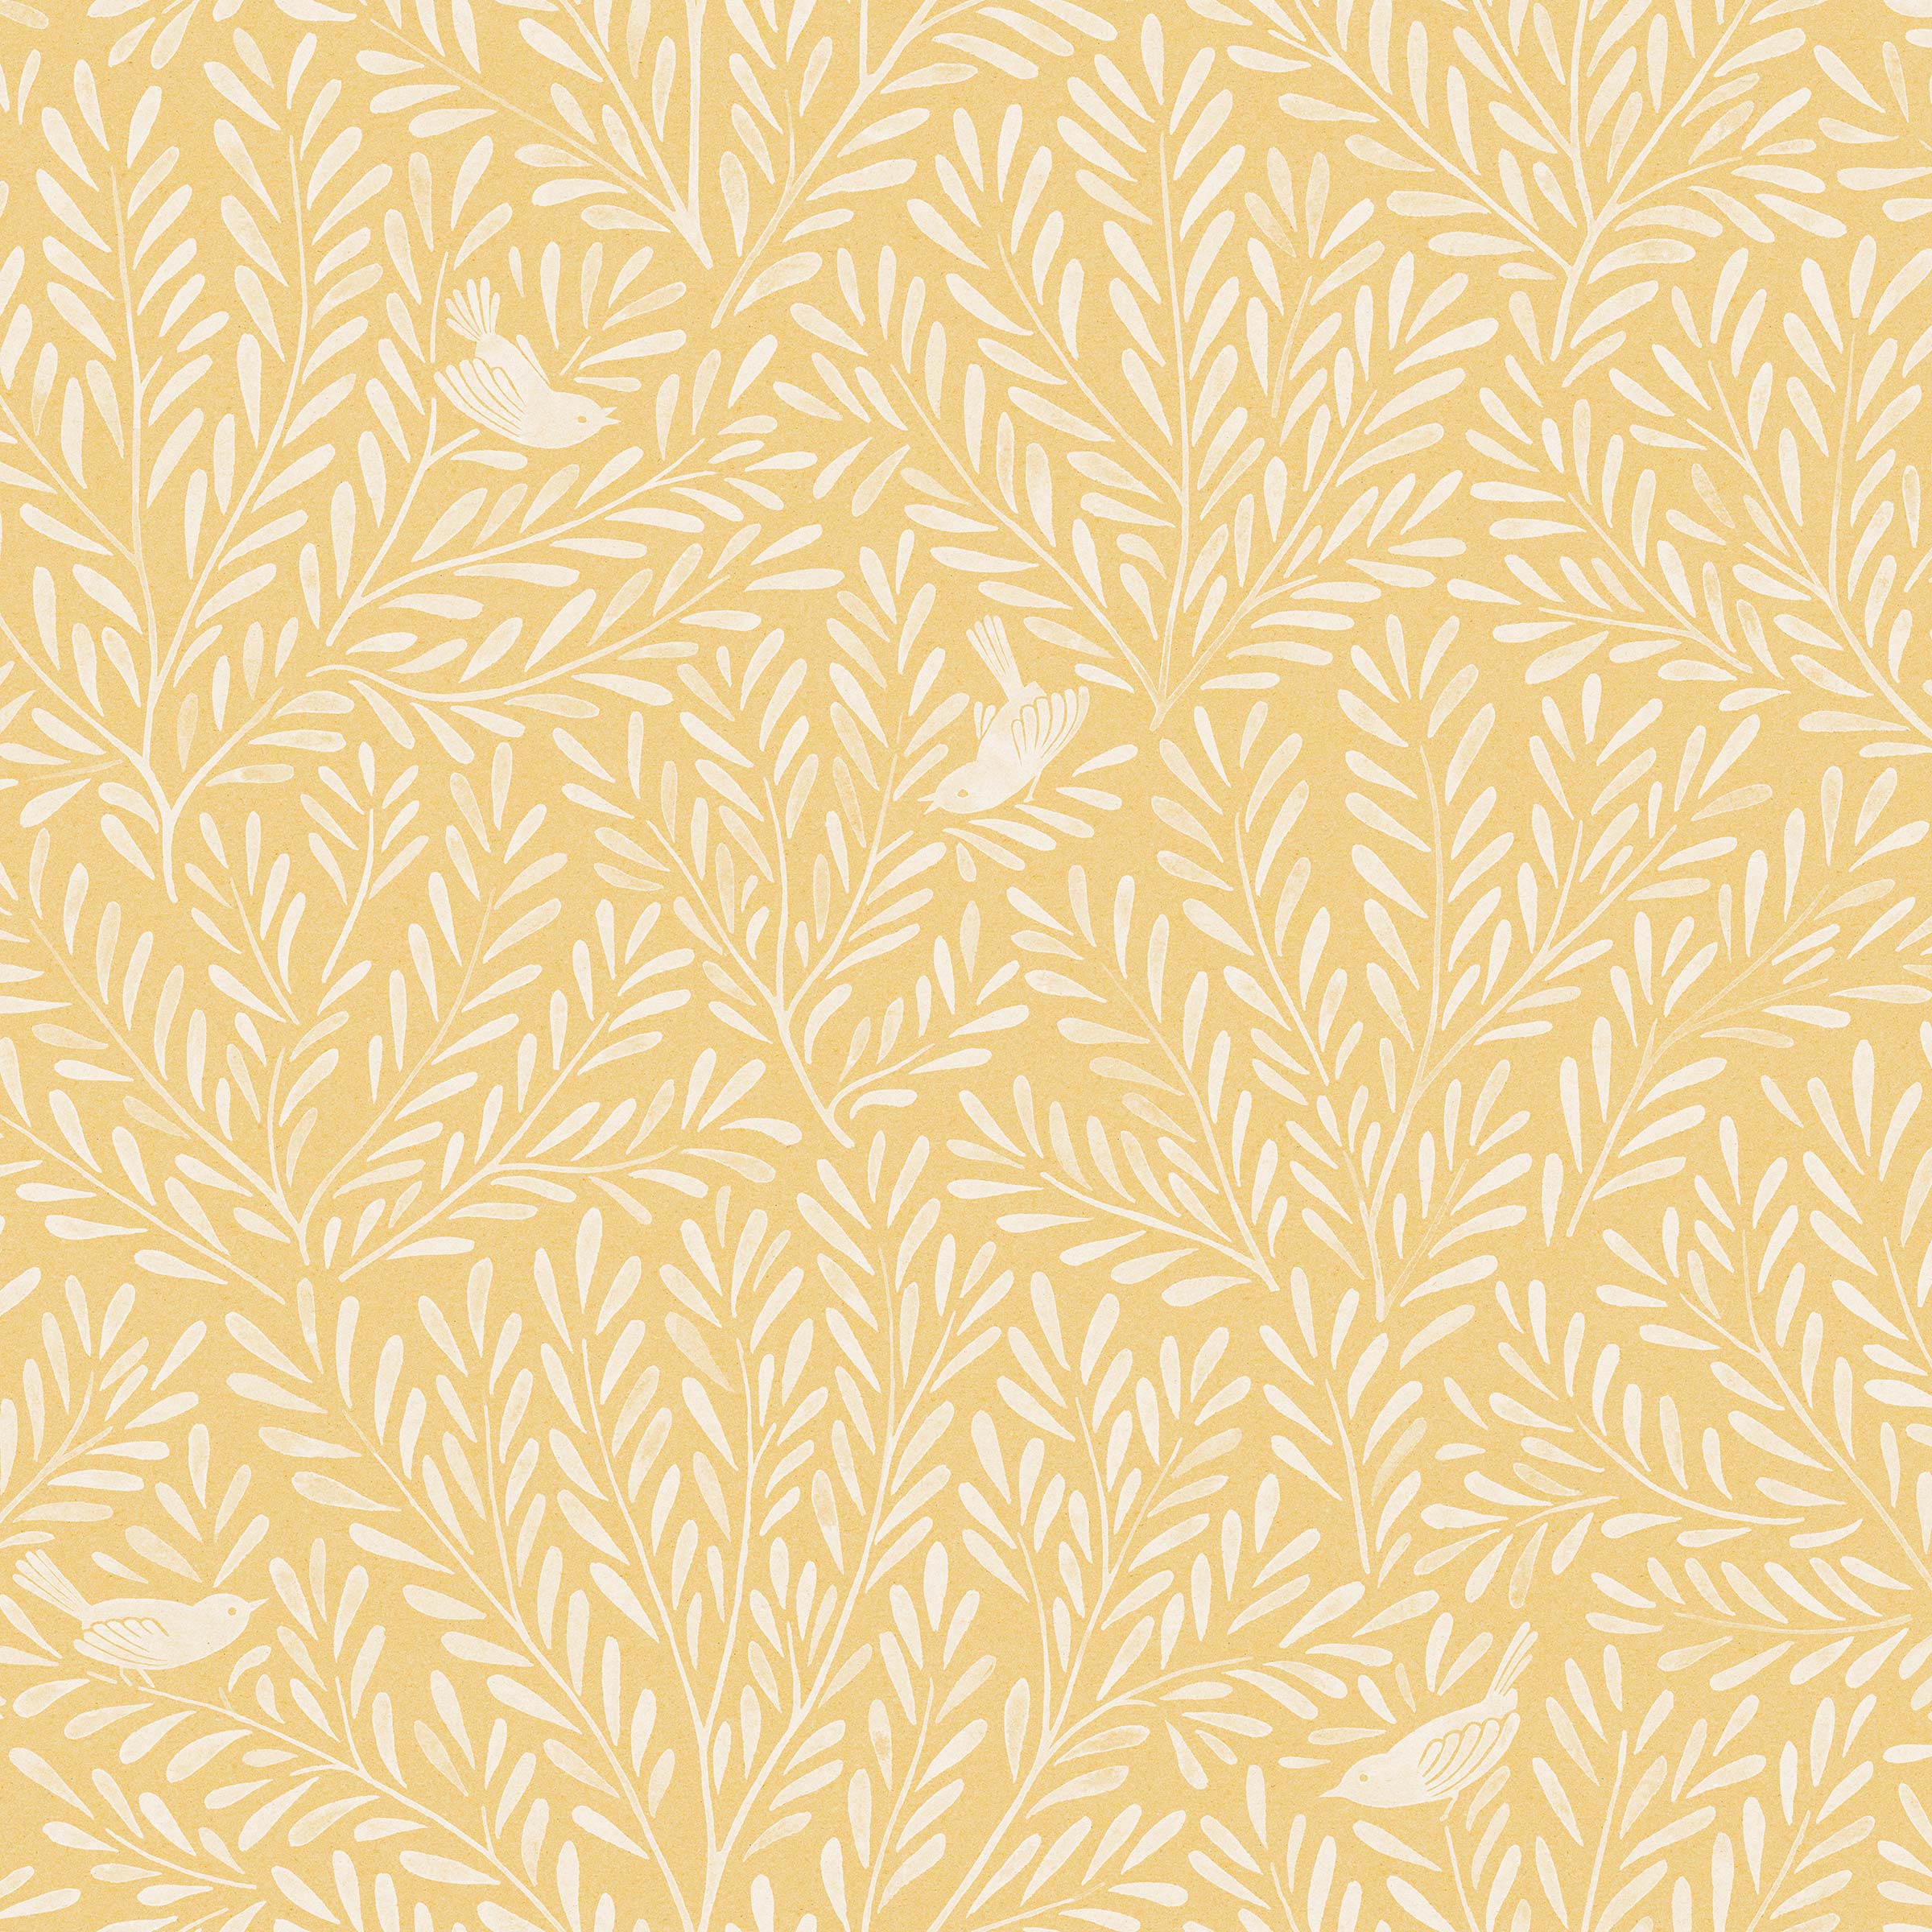 Detail of wallpaper in a playful bird and leaf print in white on a yellow field.